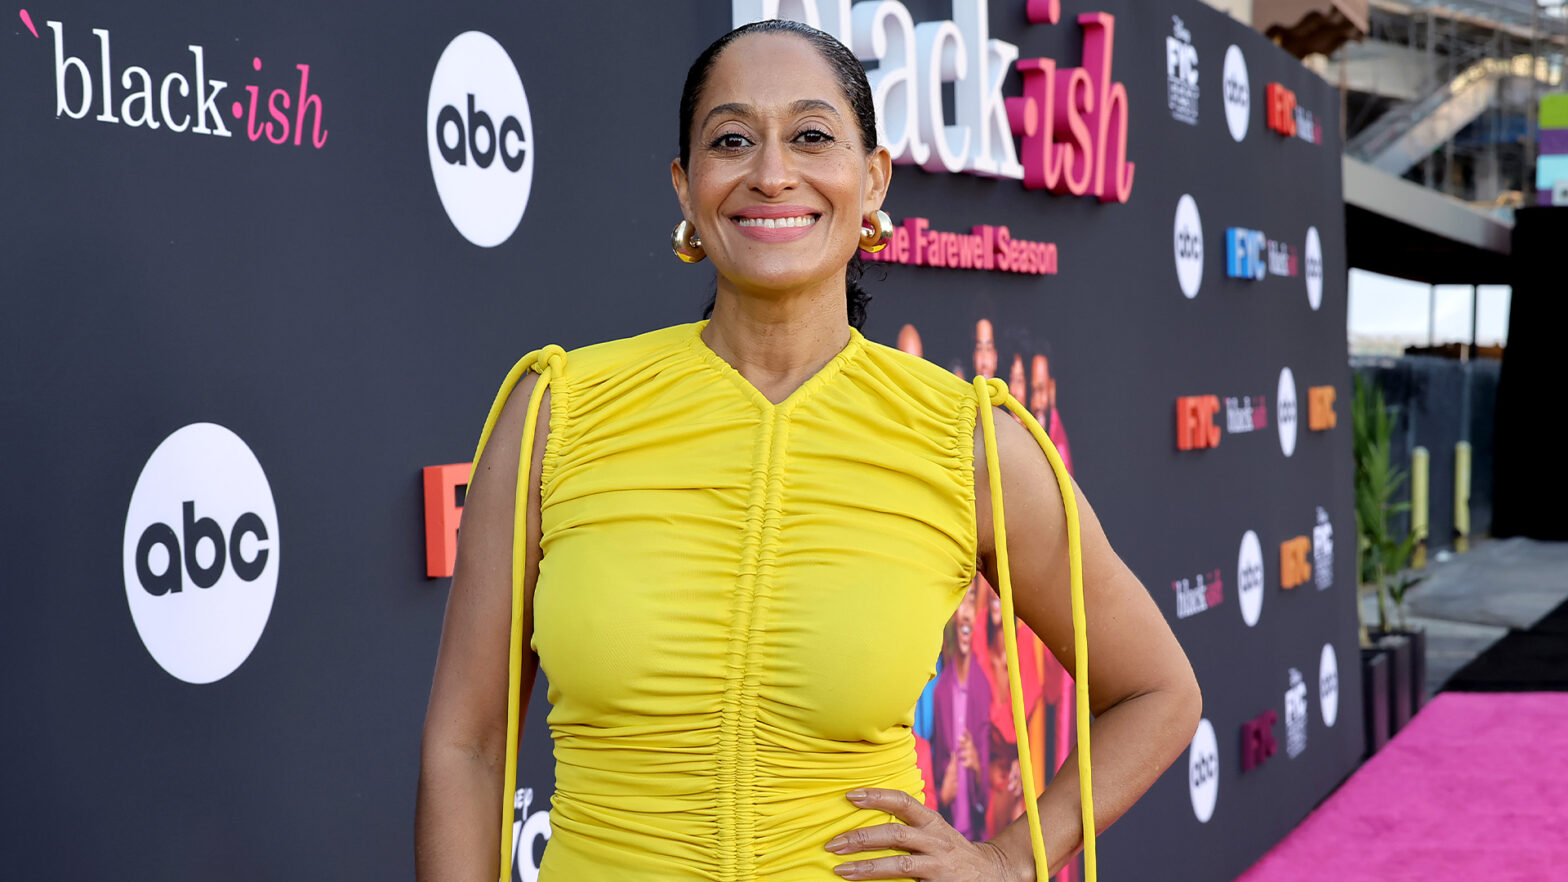 Tracee Ellis Once Addressed Her 'Black-ish' Pay Gap Publicly: 'I Wanted To Be Compensated In A Way That Matches My Contribution'